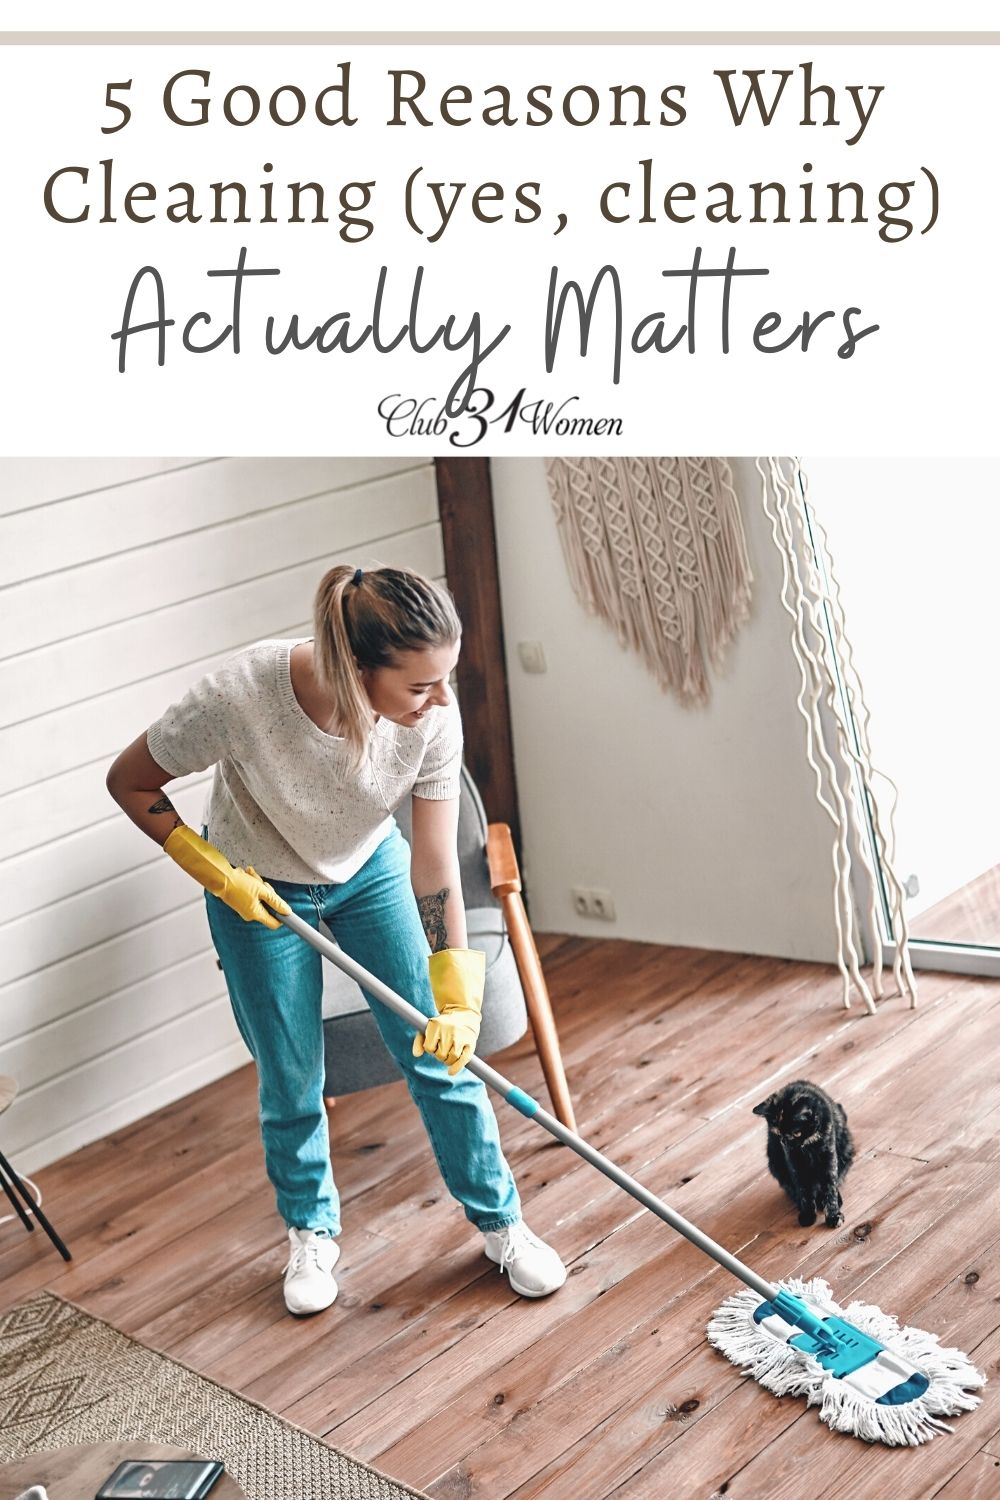 Why does cleaning really matter? Here are 5 reasons why cleaning can be considered a holy activity and why a clean house preaches a sermon of hope. via @Club31Women